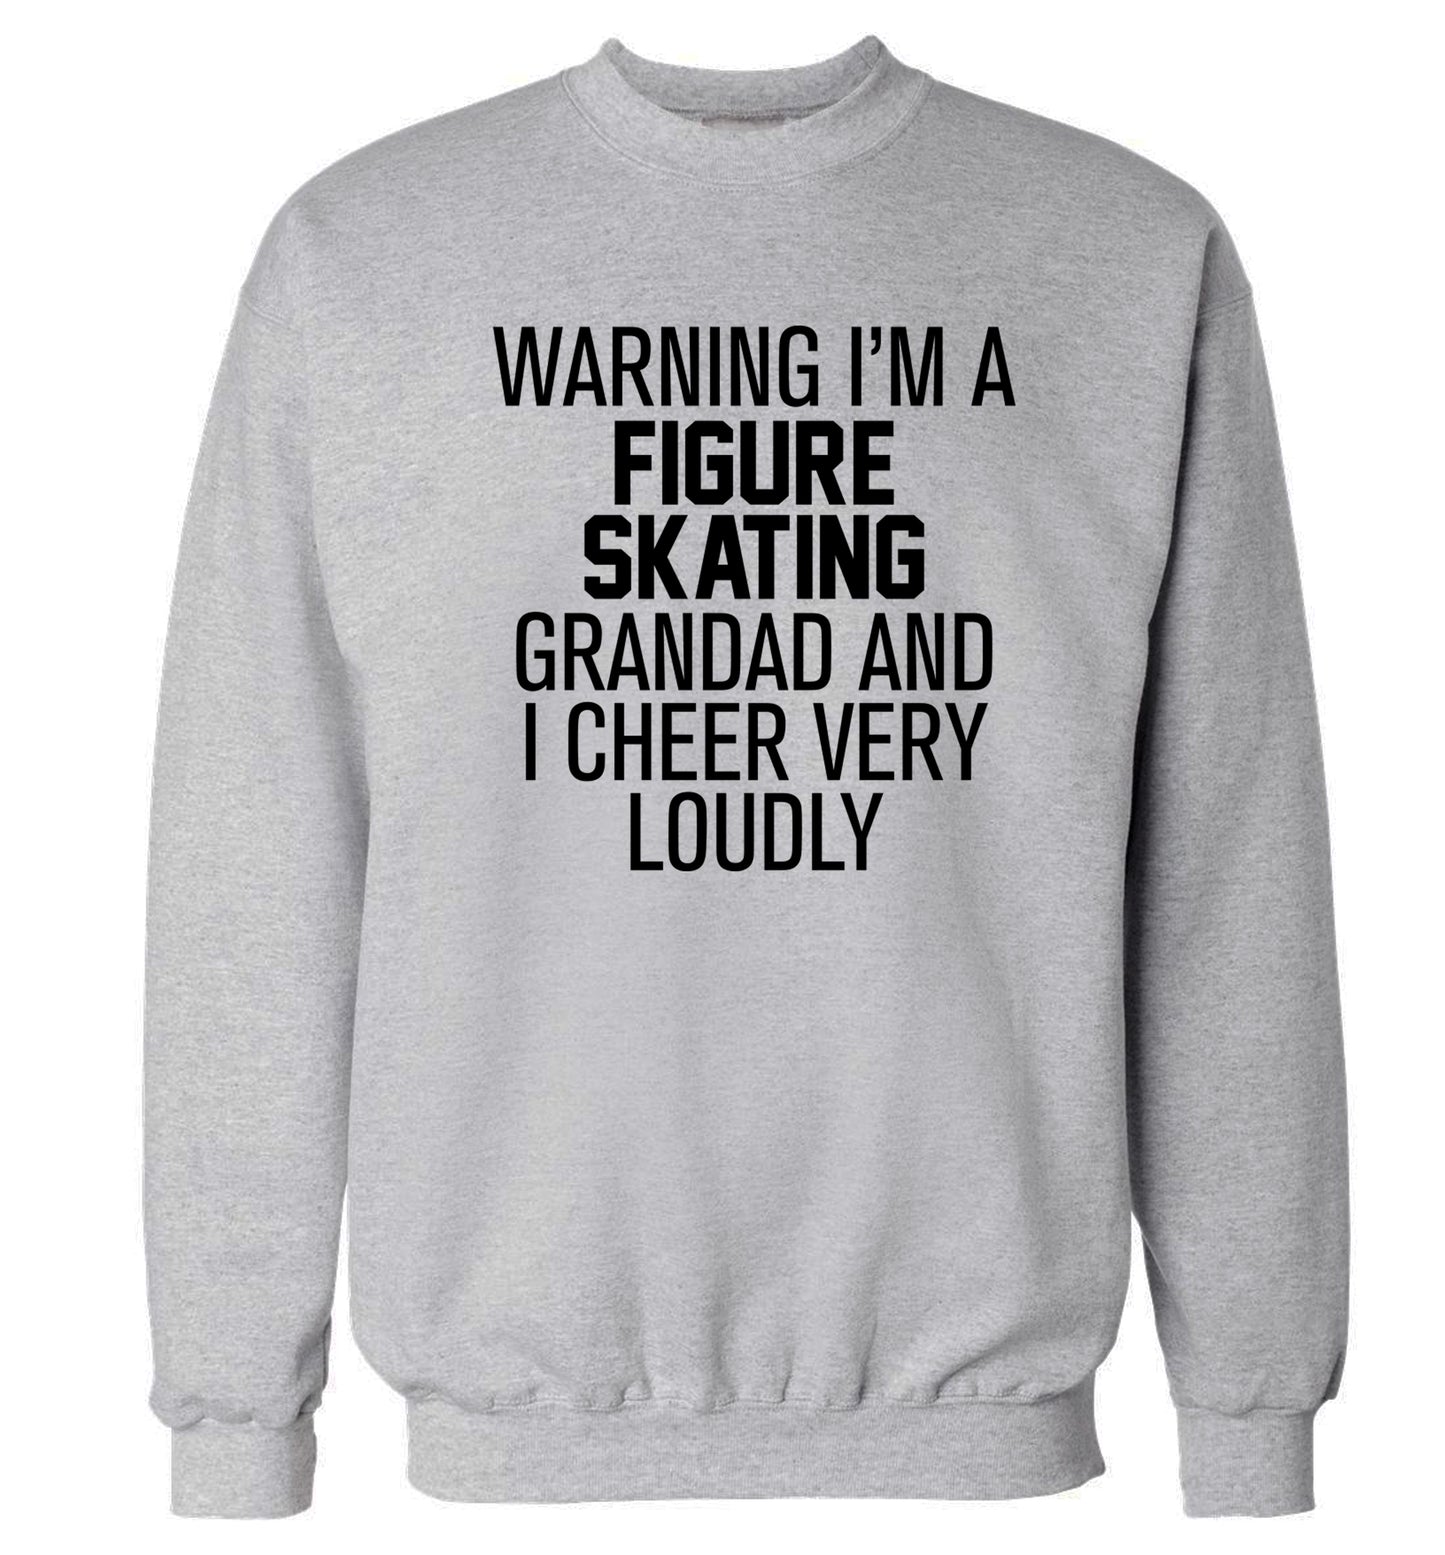 Warning I'm a figure skating grandad and I cheer very loudly Adult's unisexgrey Sweater 2XL